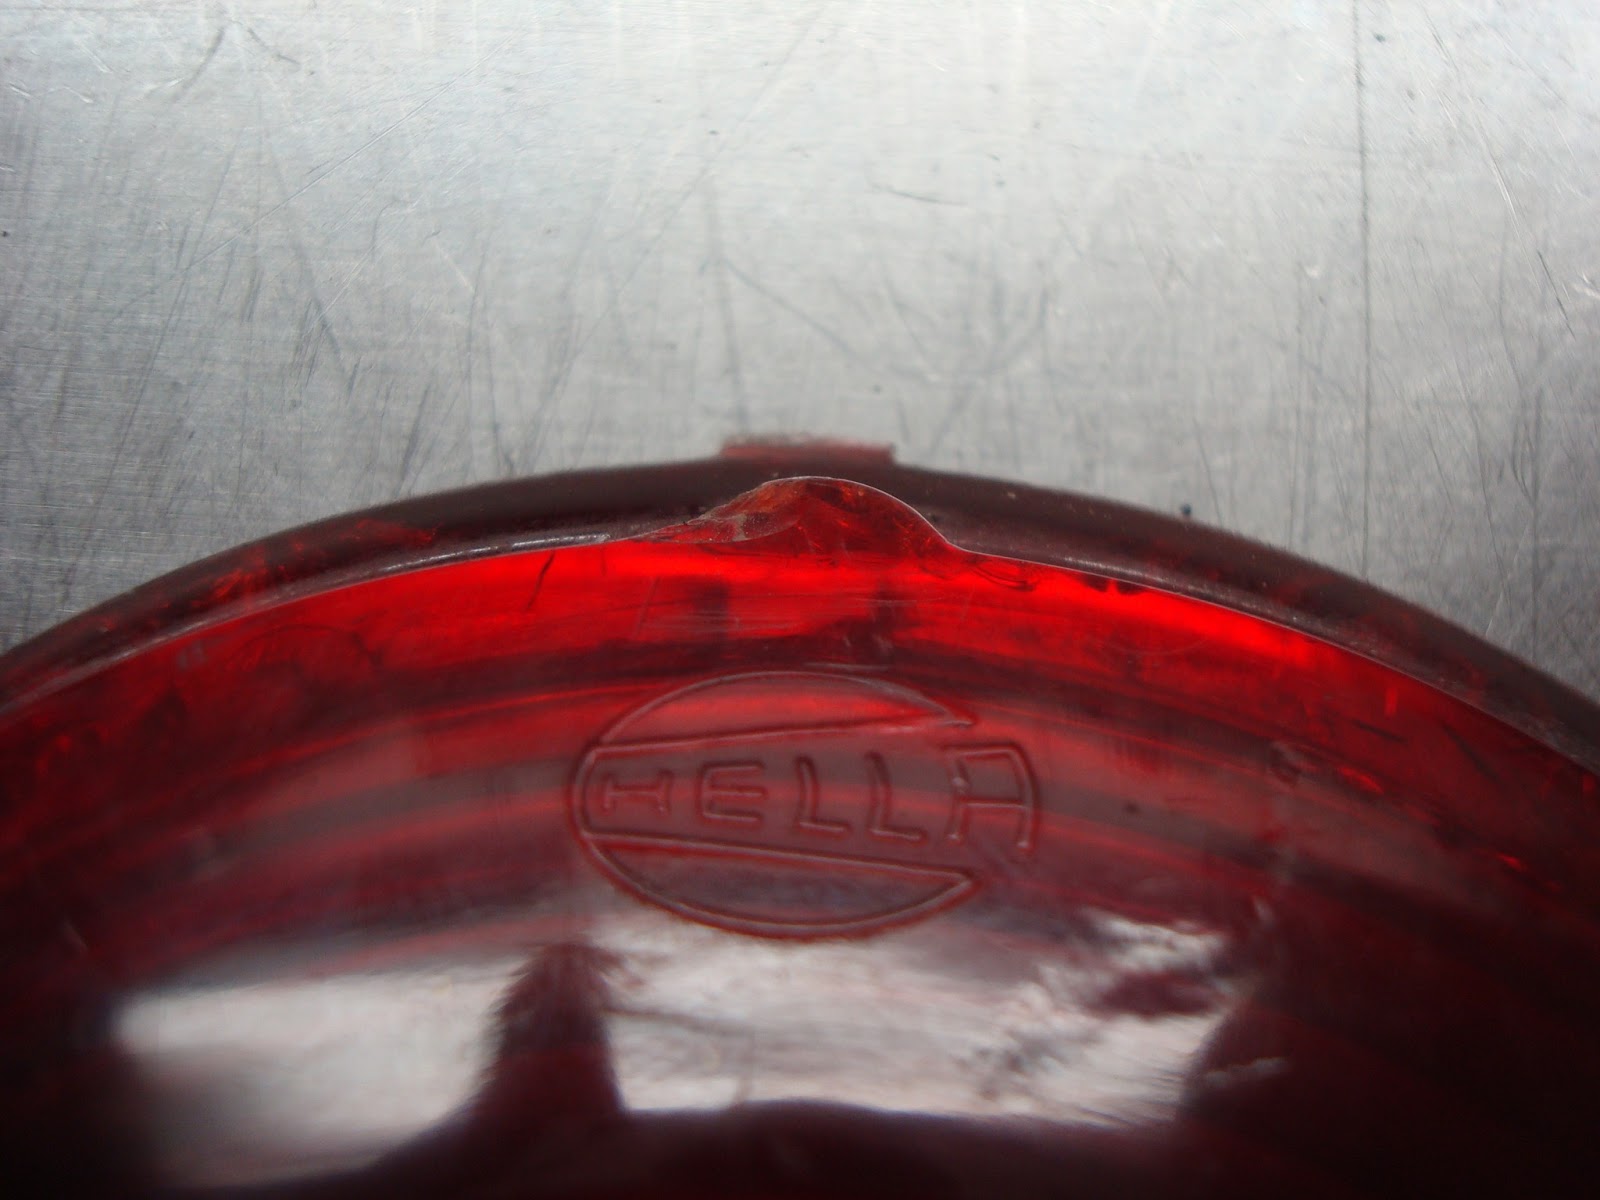 BMW Motorcycle Red Lamp Lens HELLA Tail Light R26 R27 R50 /2 S R60 /2 R69 S 